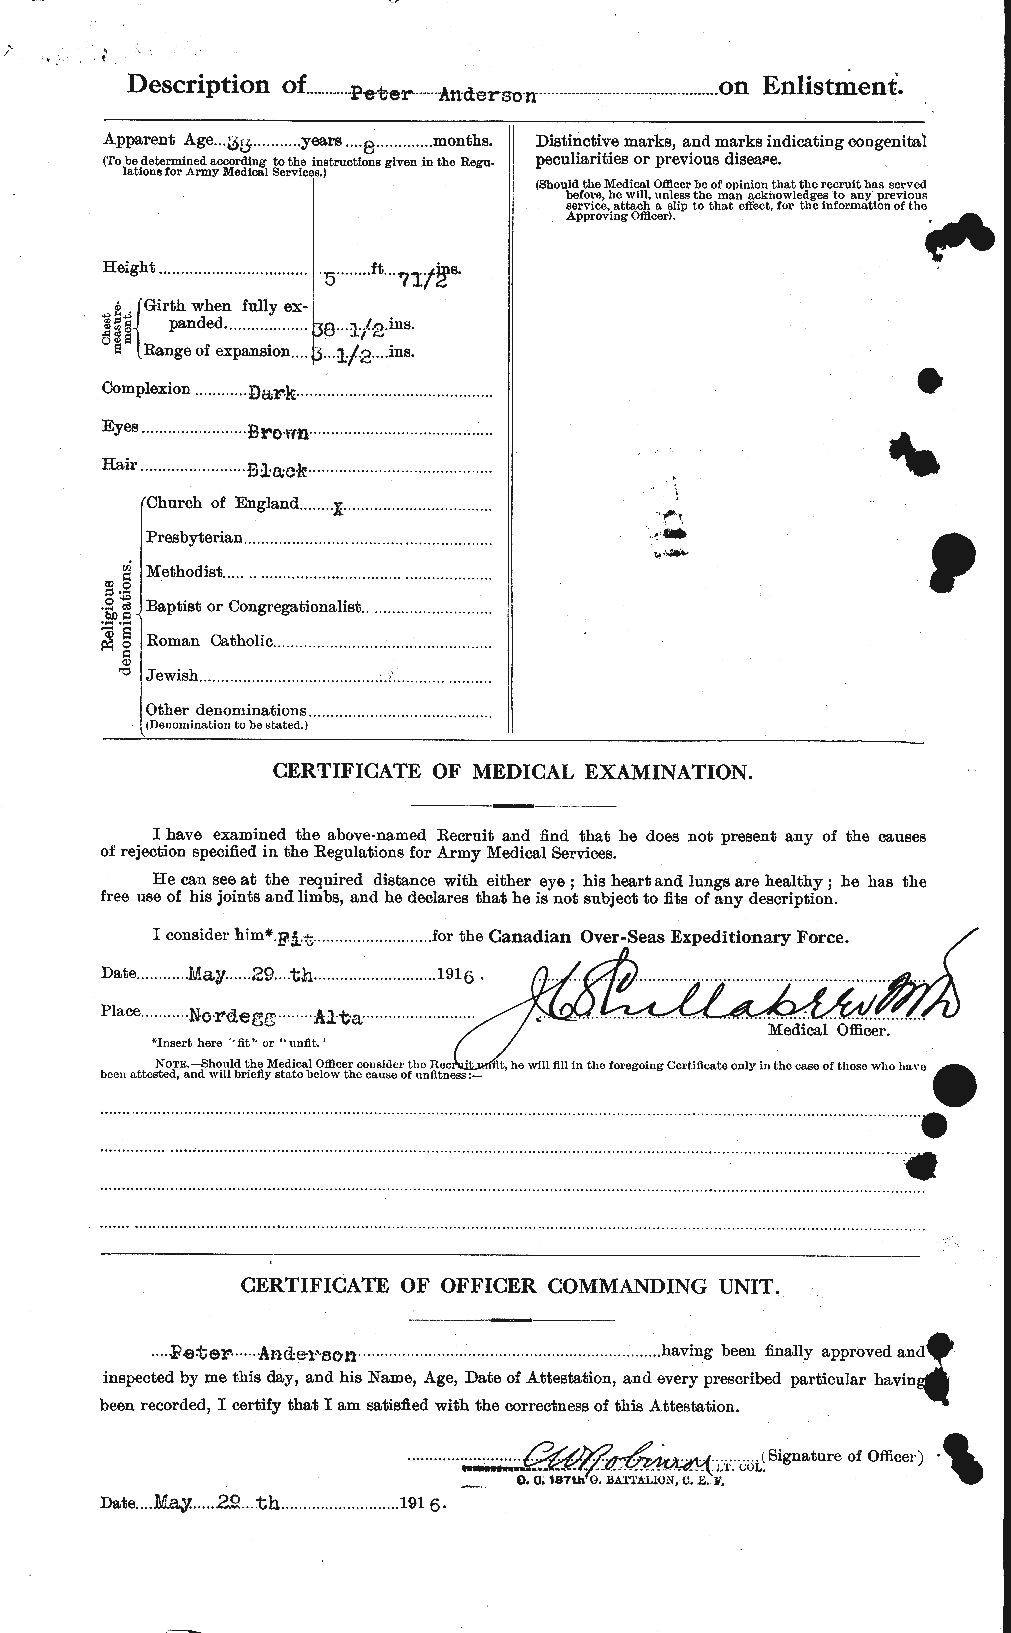 Personnel Records of the First World War - CEF 207349b